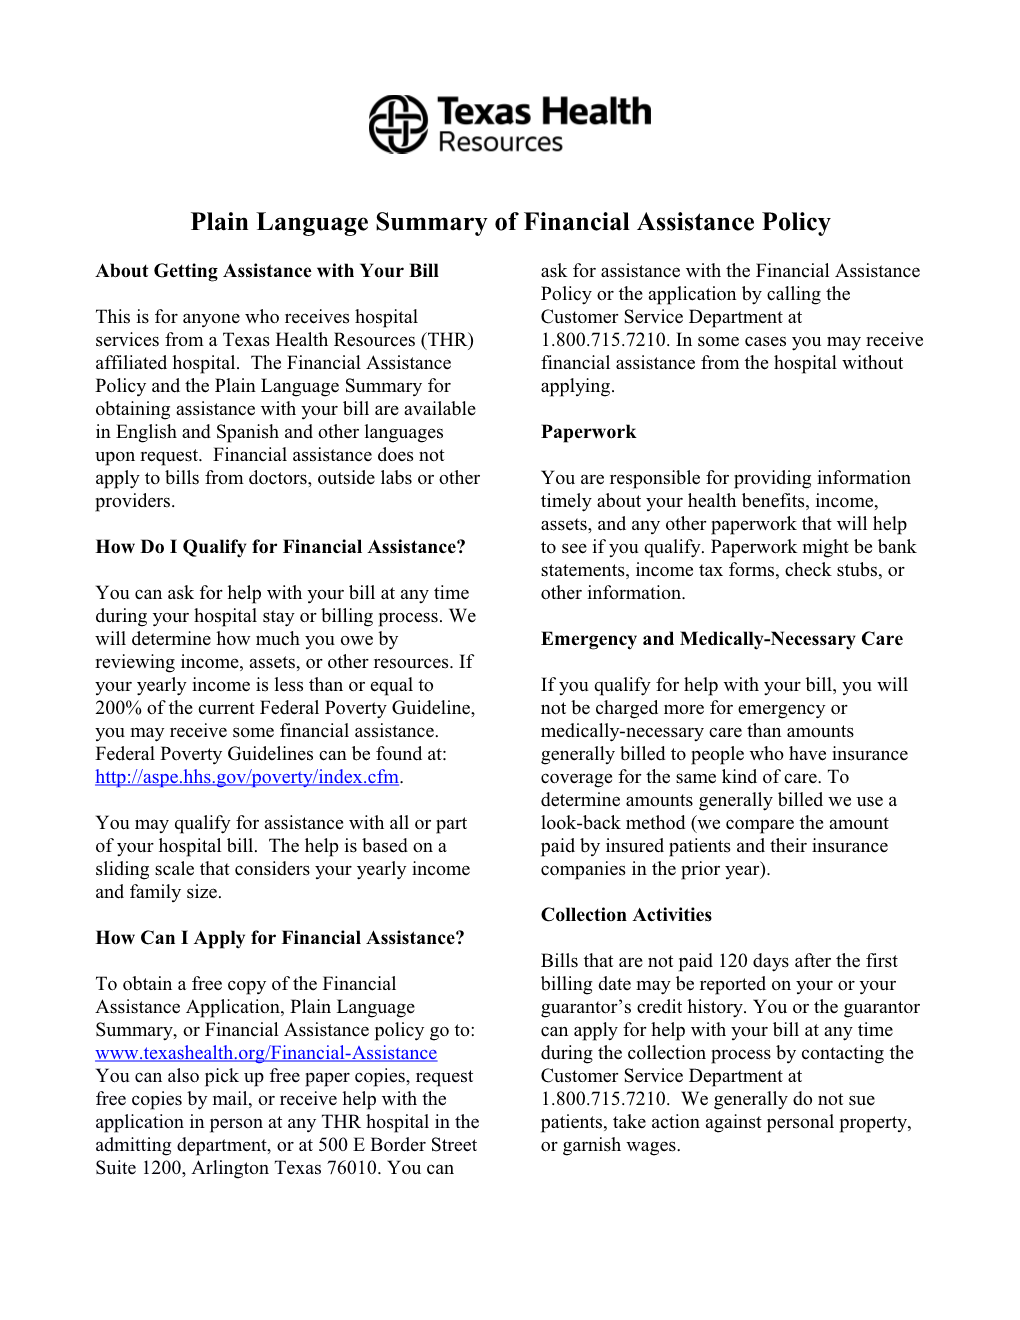 Plain Language Summary of Financial Assistance Policy